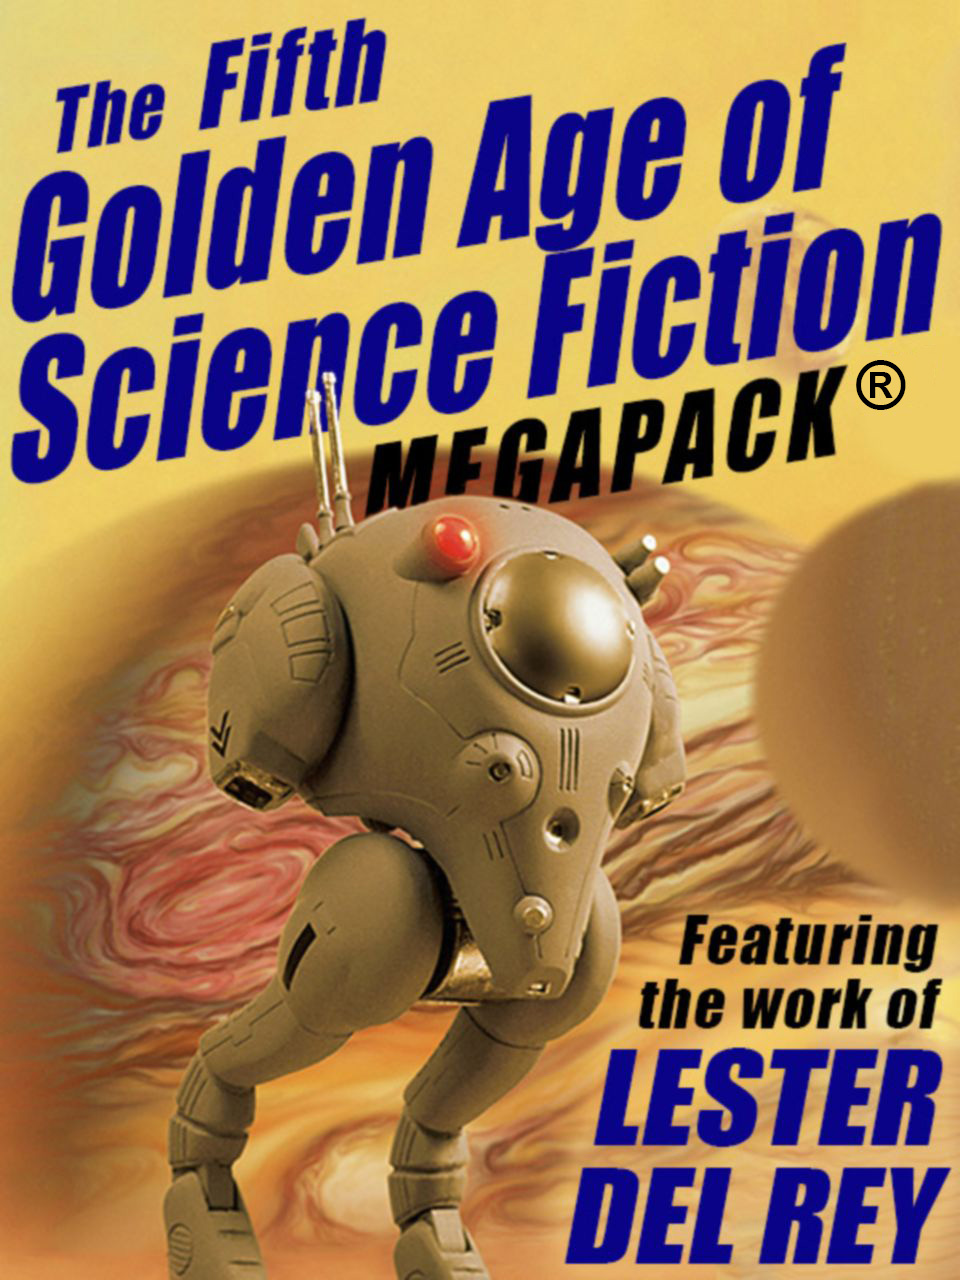 The Fifth Golden Age of Science Fiction MEGAPACK : Lester del Rey